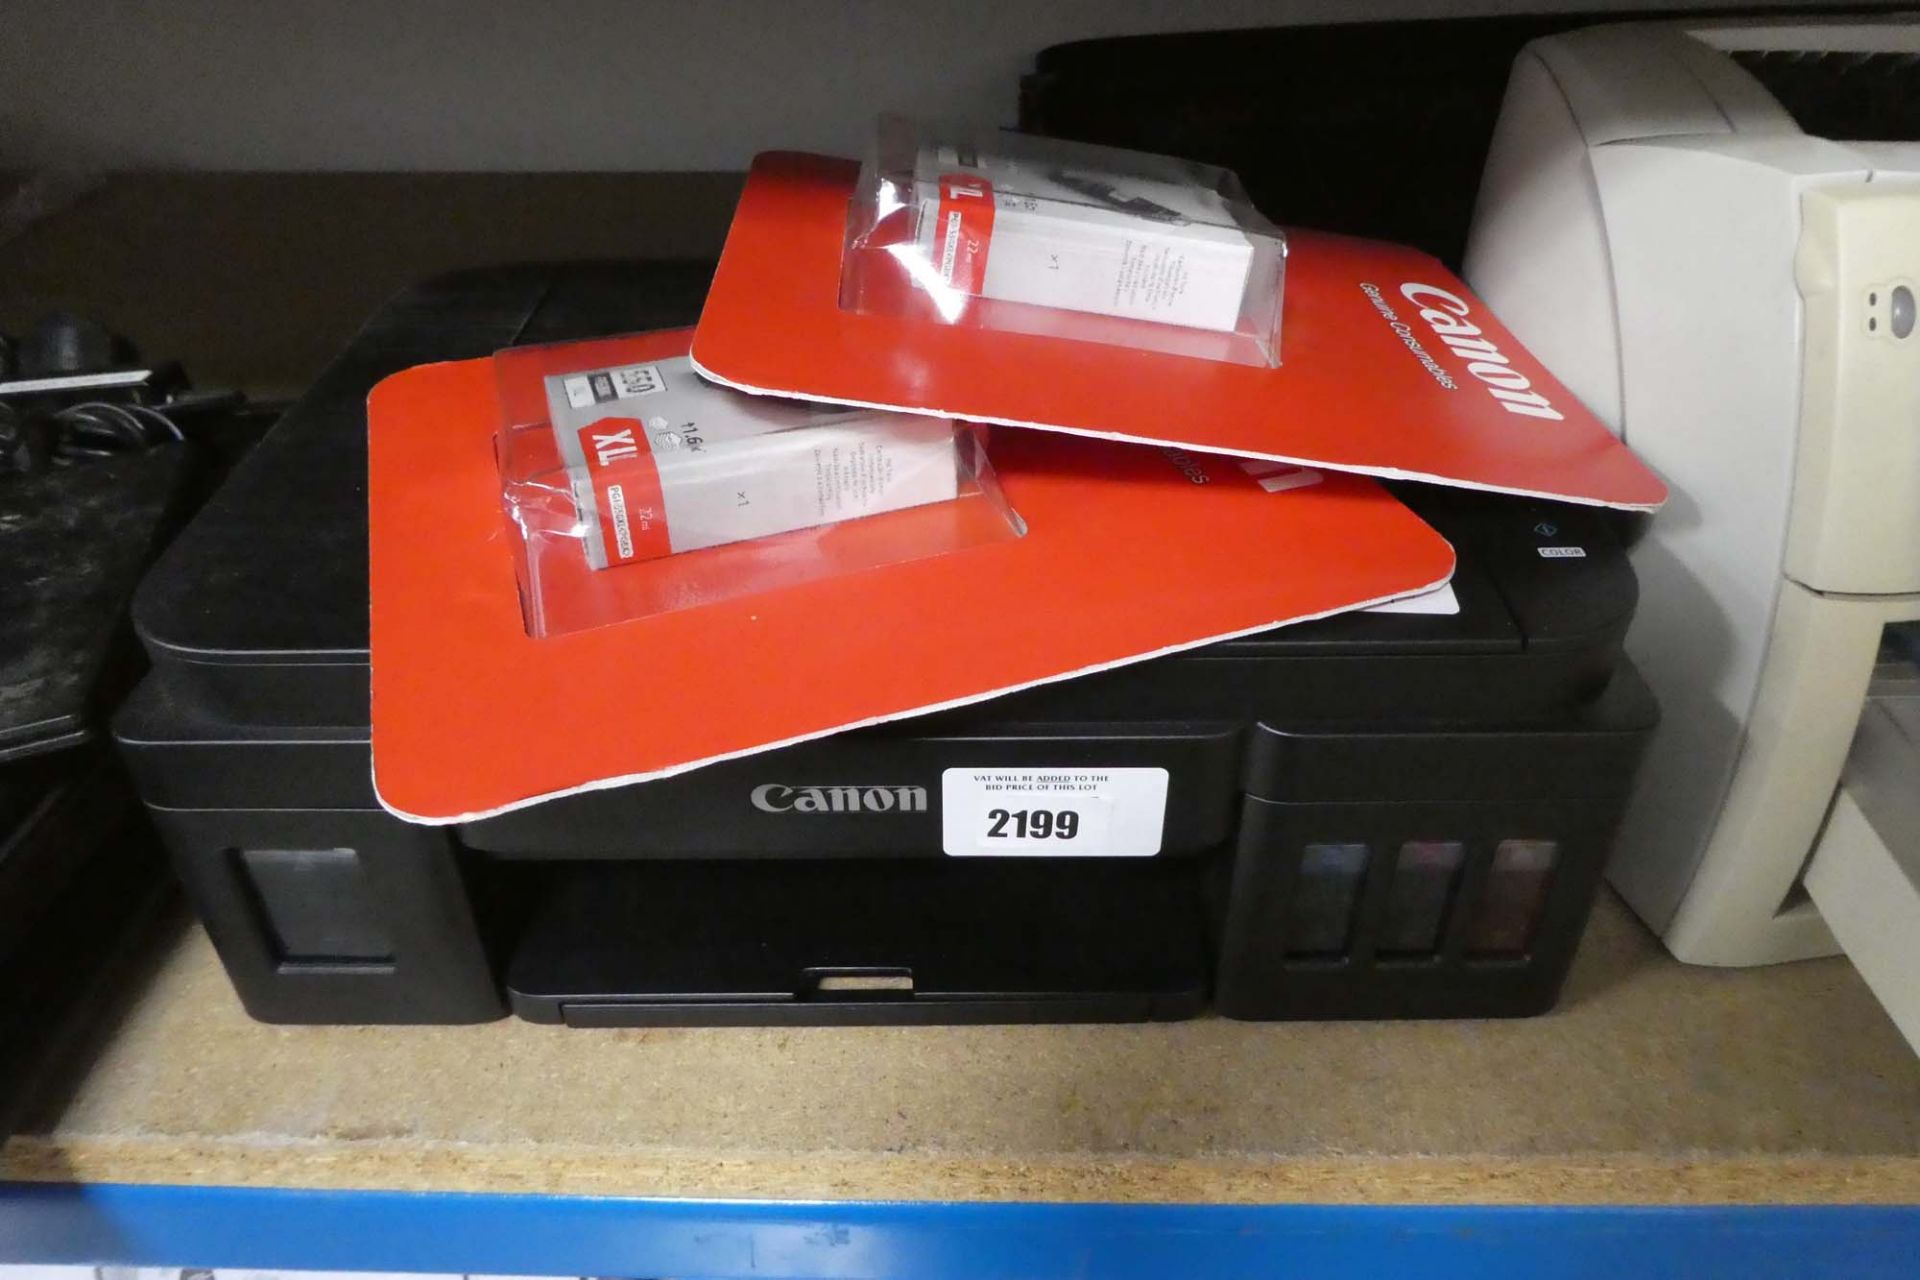 Canon Pixma G3501 printer together with 2 Pixma 550 black XL colour ink cartridges in blister packs